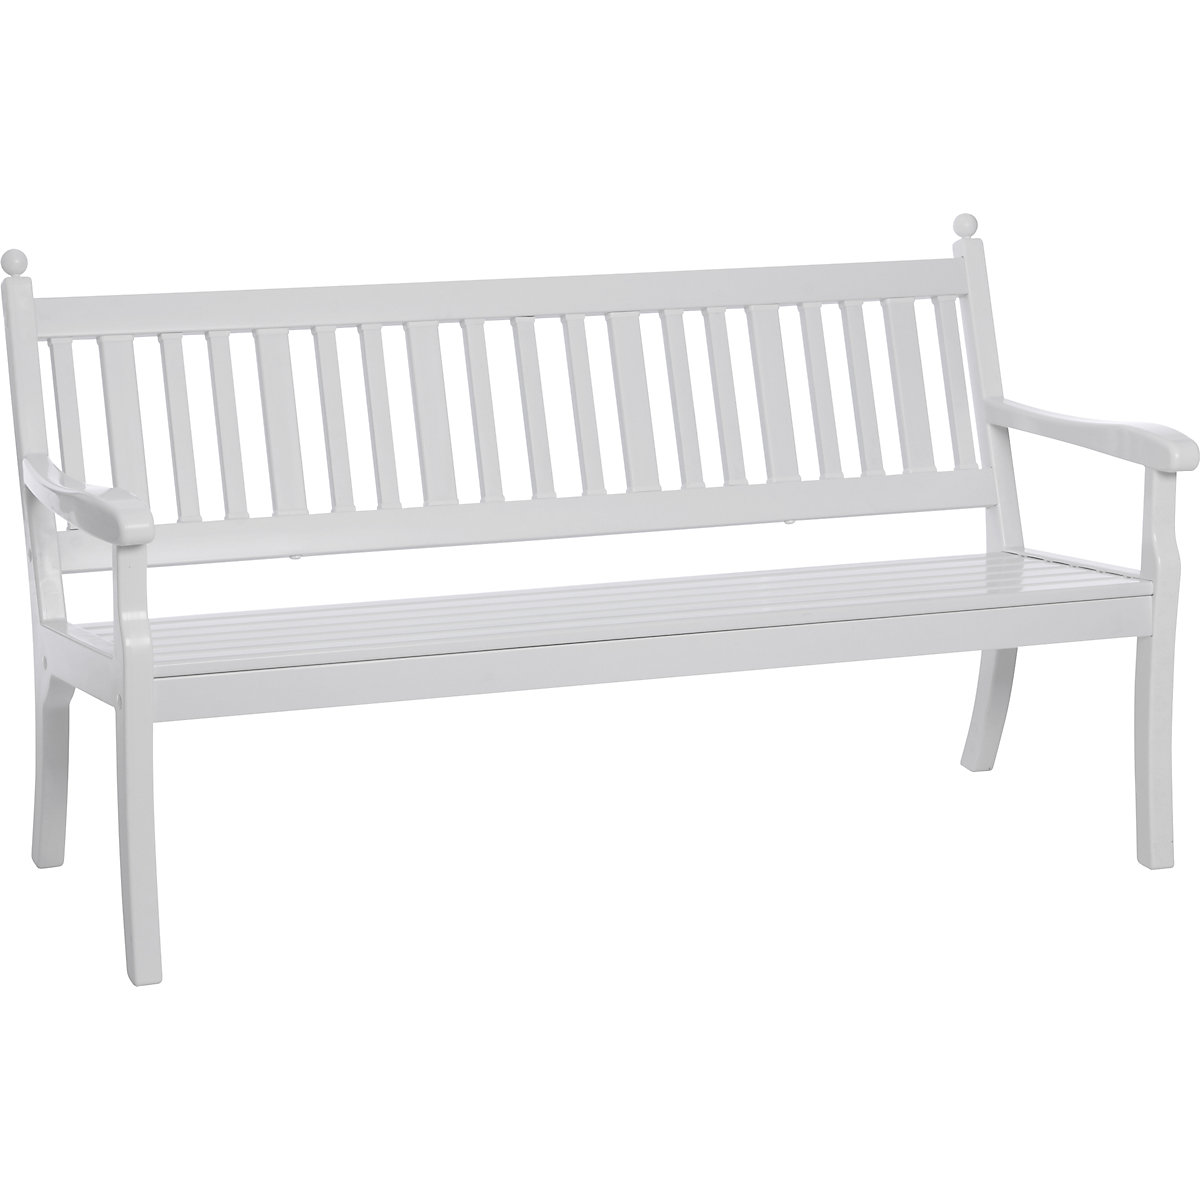 Seating bench, modern, HxD 880 x 690 mm, 3 seater-6